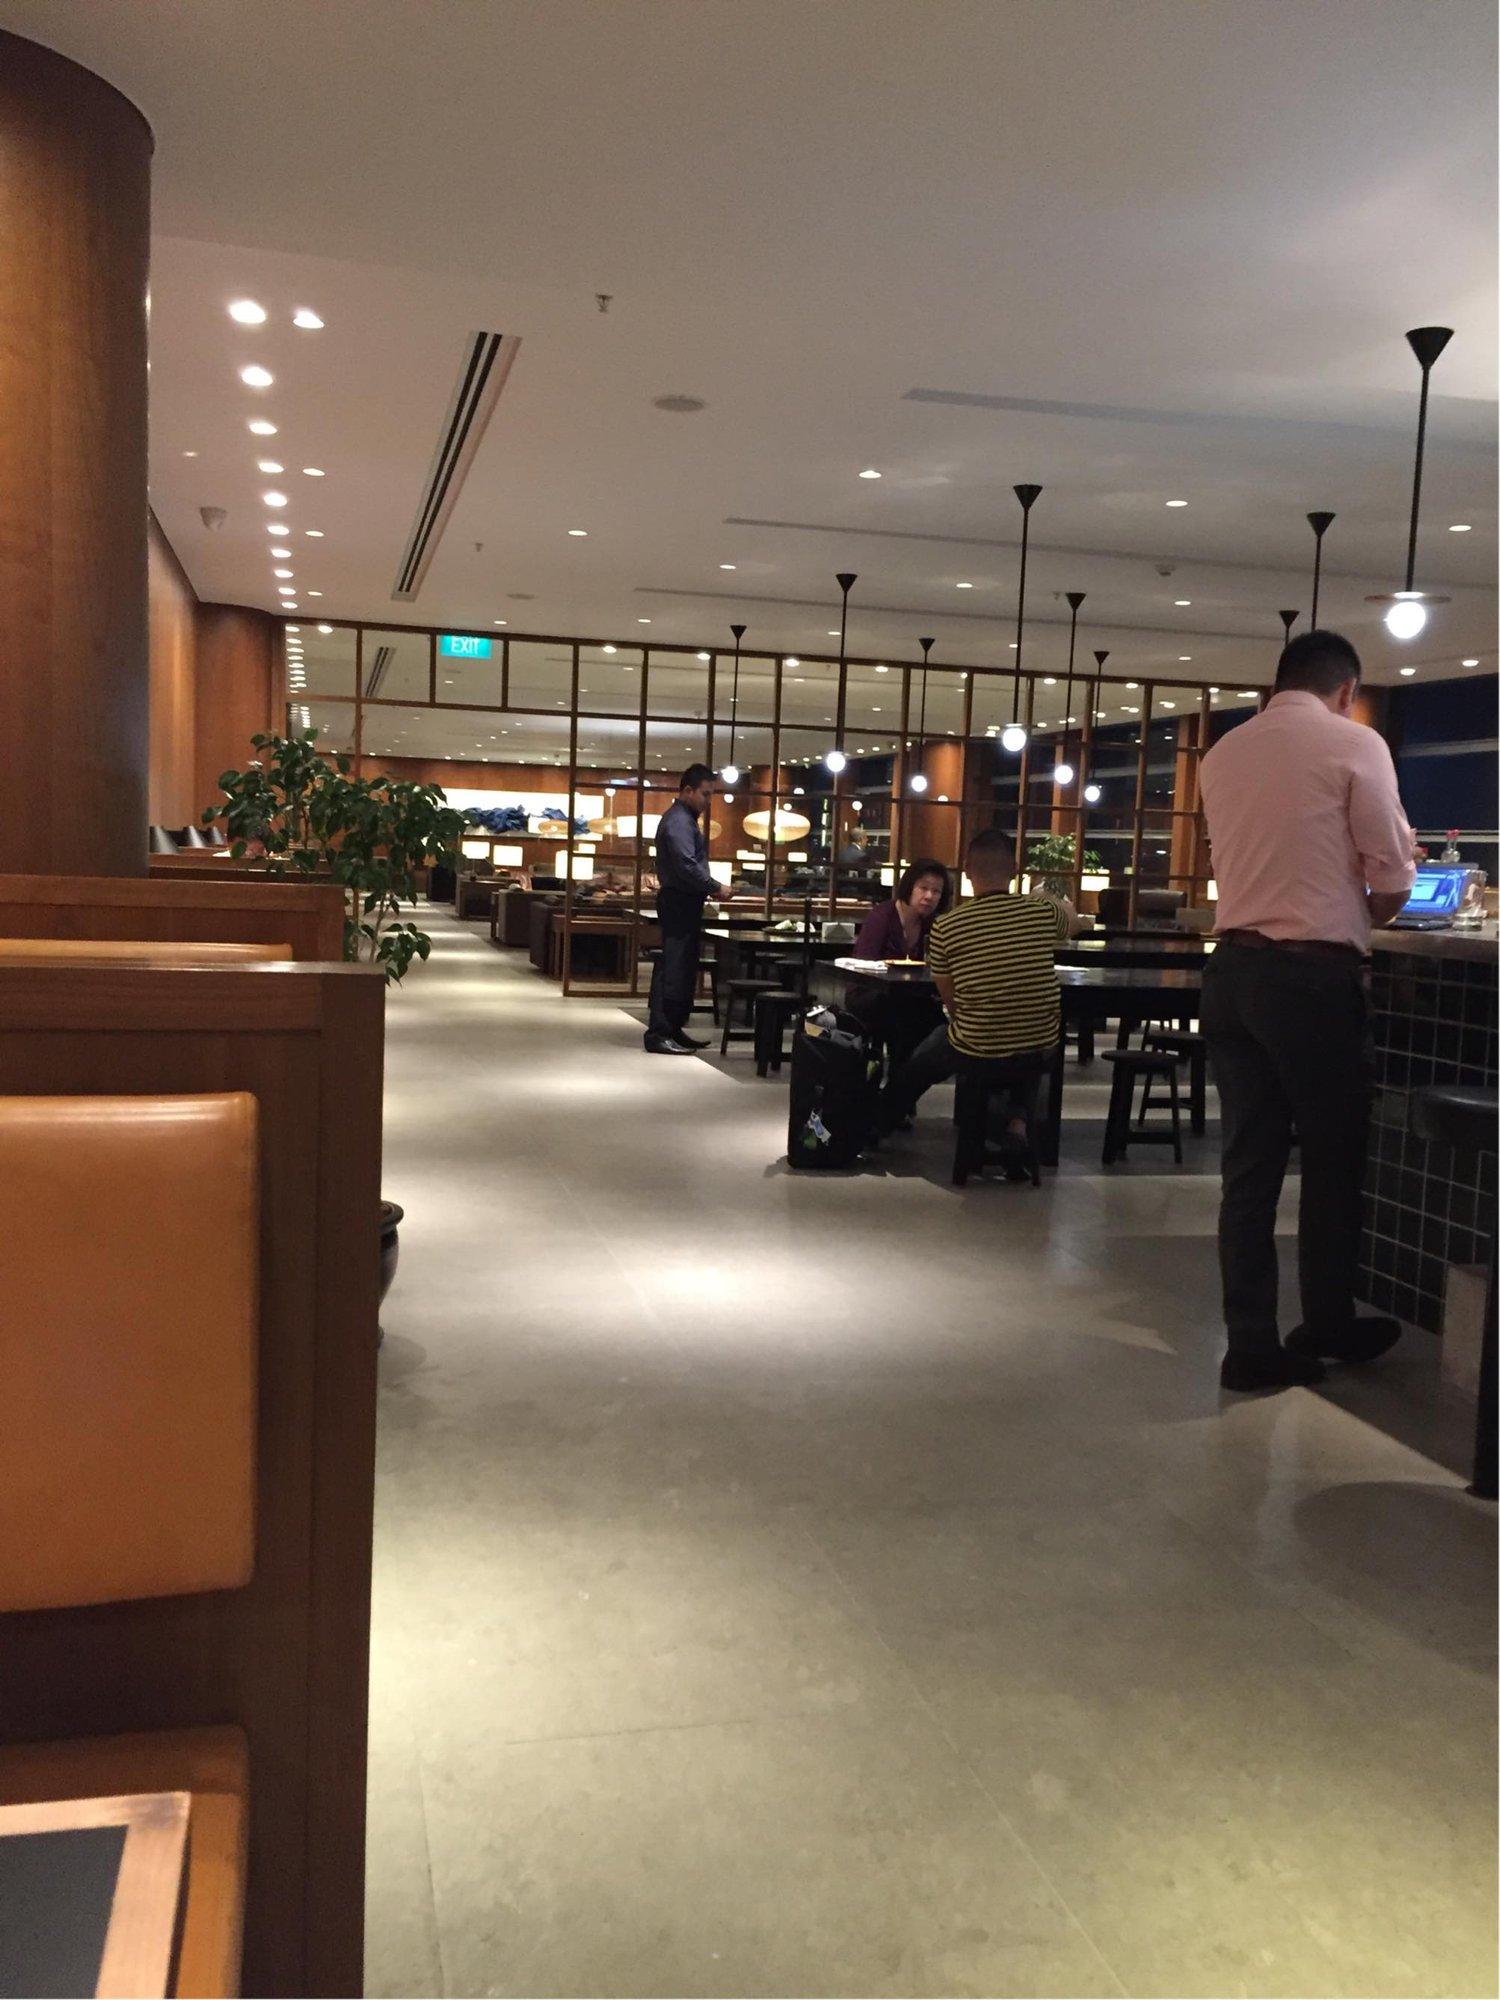 Cathay Pacific First and Business Class Lounge image 19 of 19